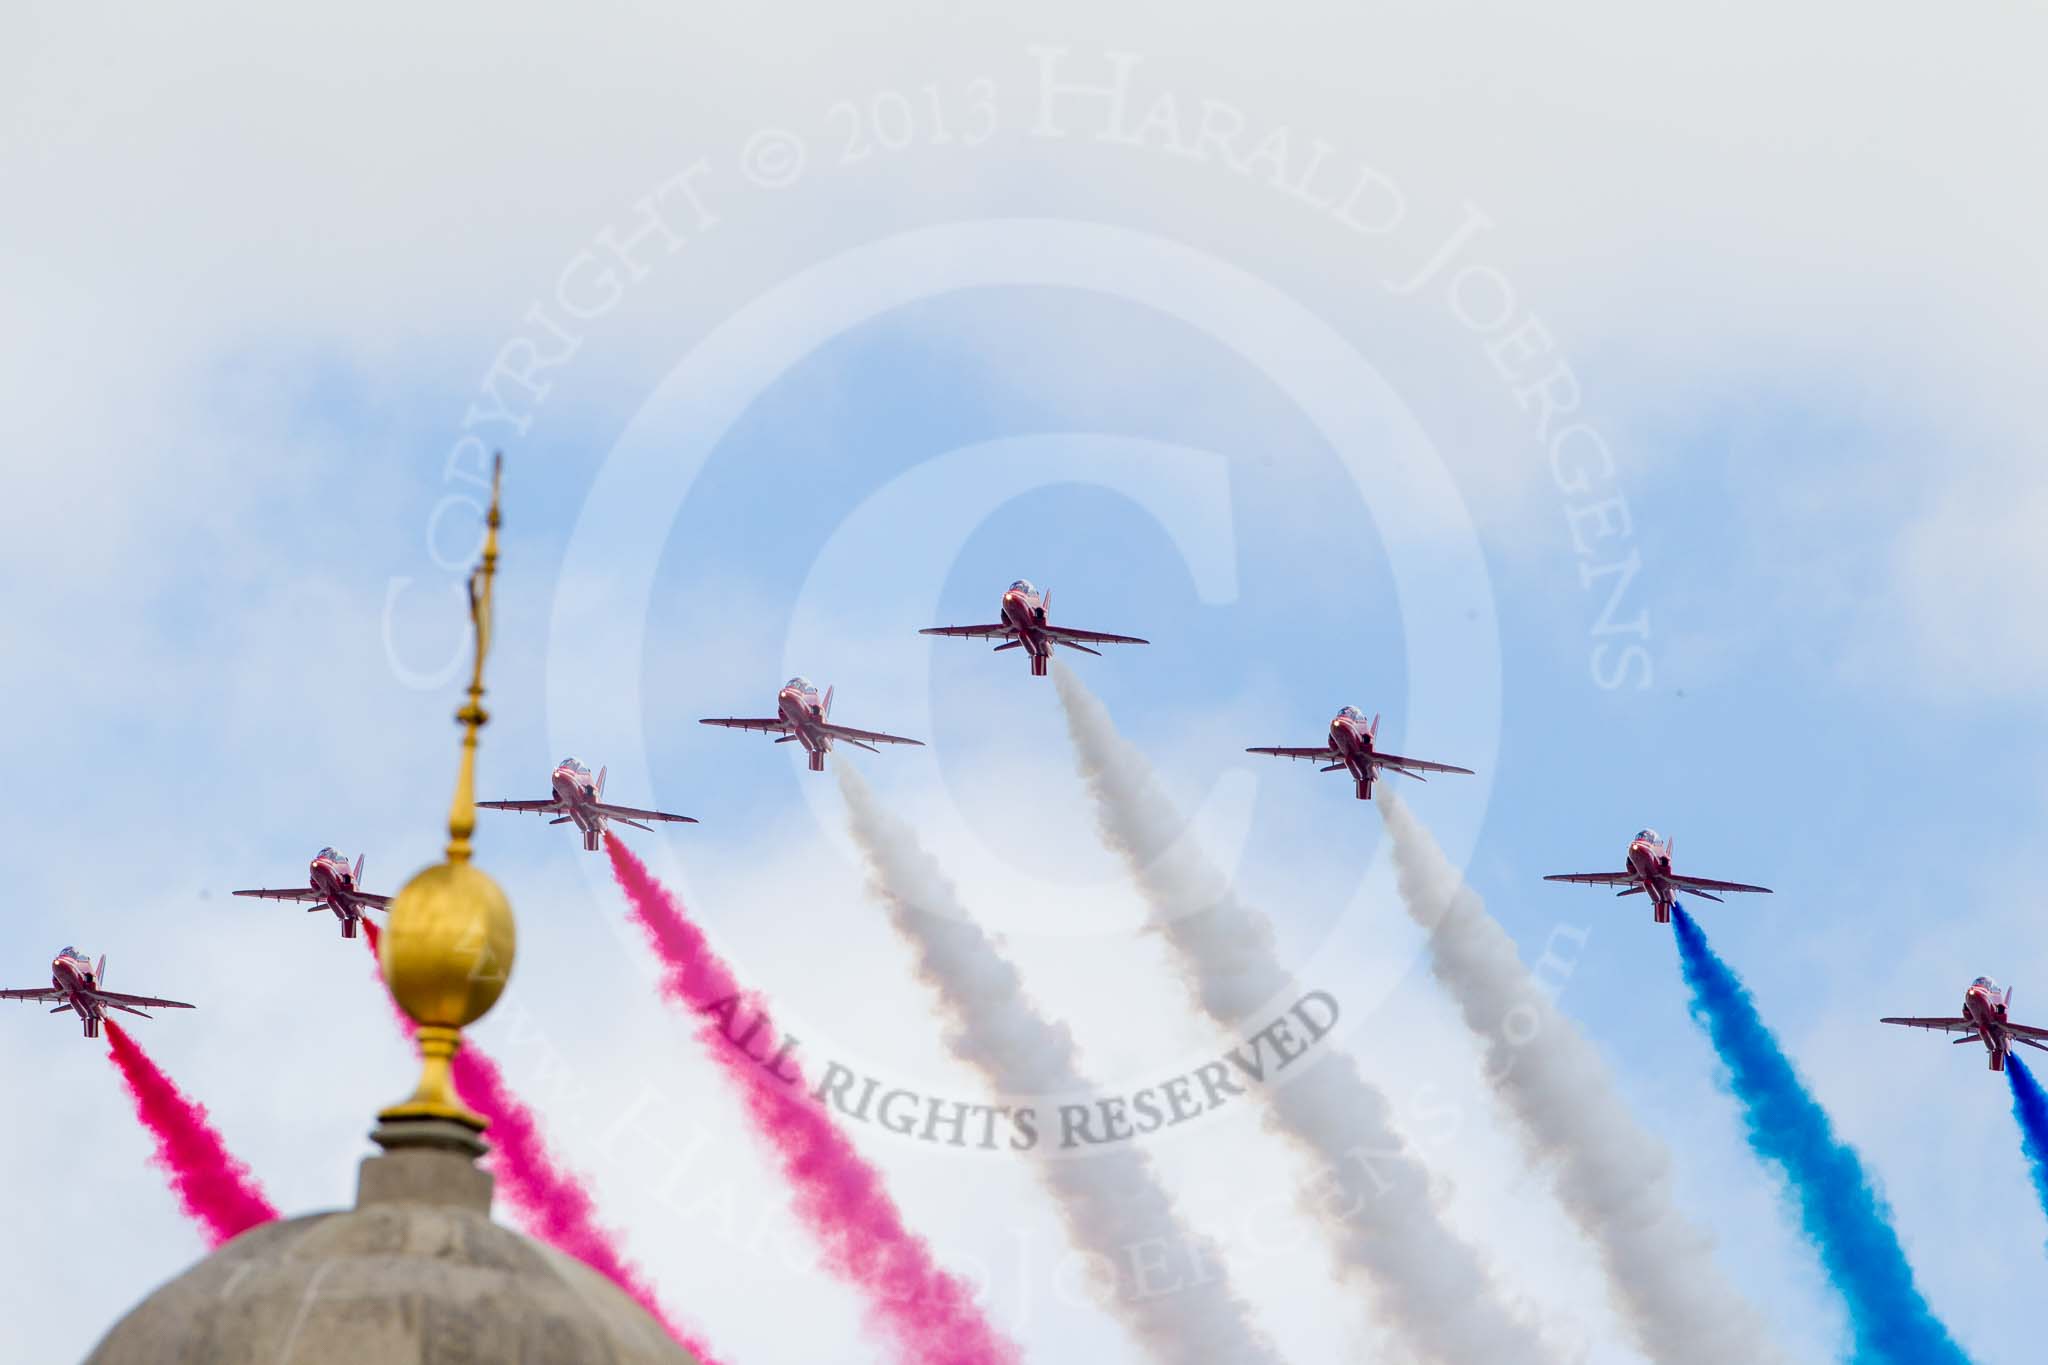 Trooping the Colour 2013: The RAF Flypast. Image #927, 15 June 2013 13:03 Horse Guards Parade, London, UK